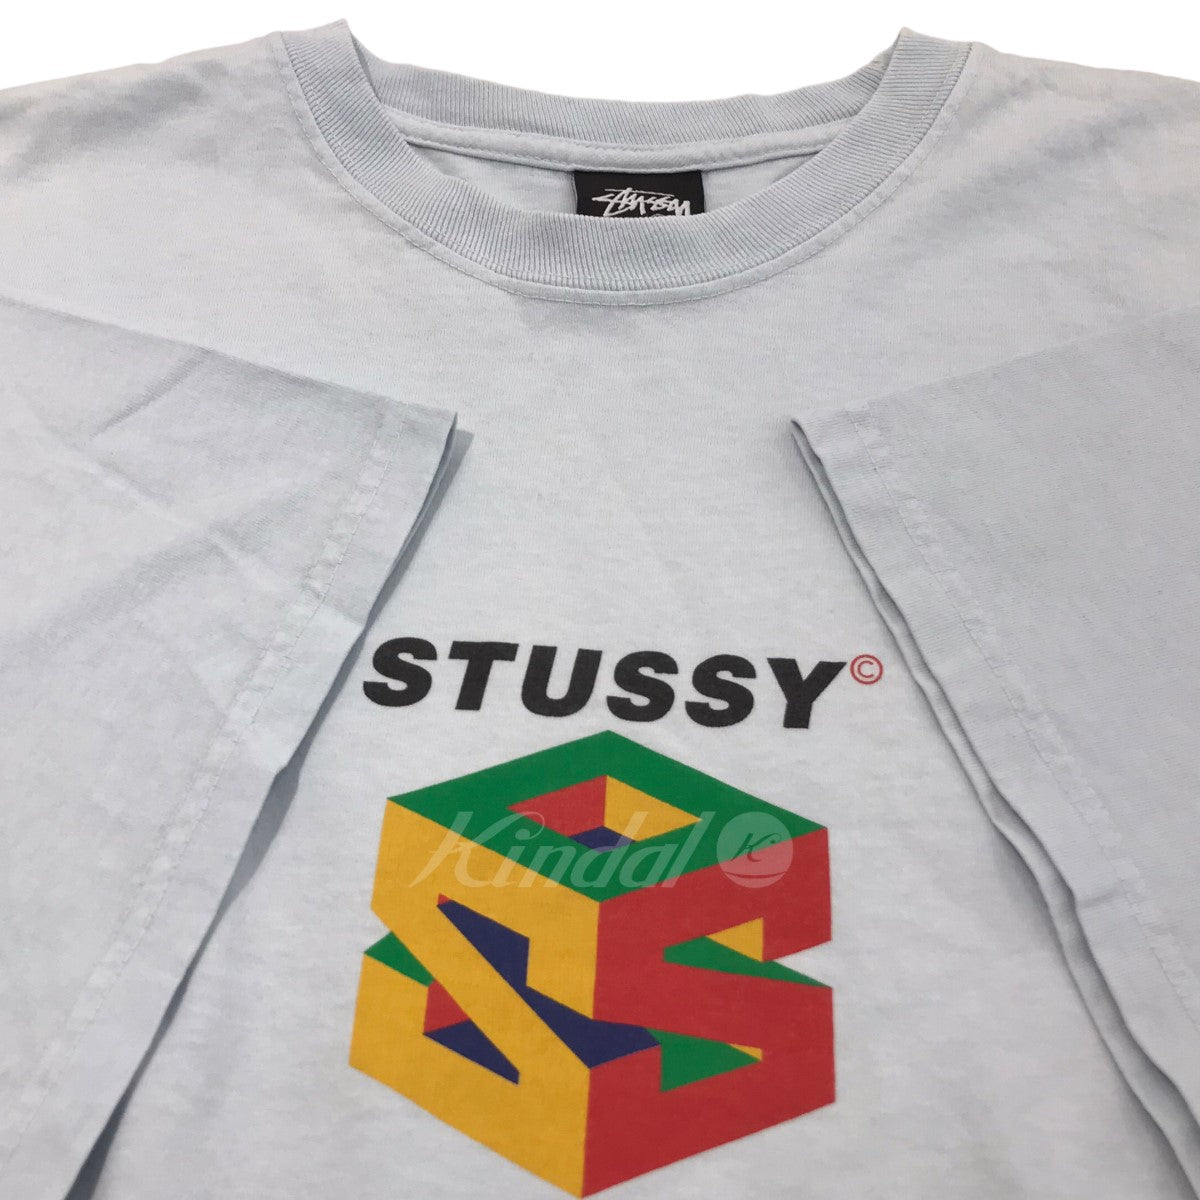 Stussy(ステューシー) 23SS ｢S64 Pigment Dyed Tee｣プリントTシャツ